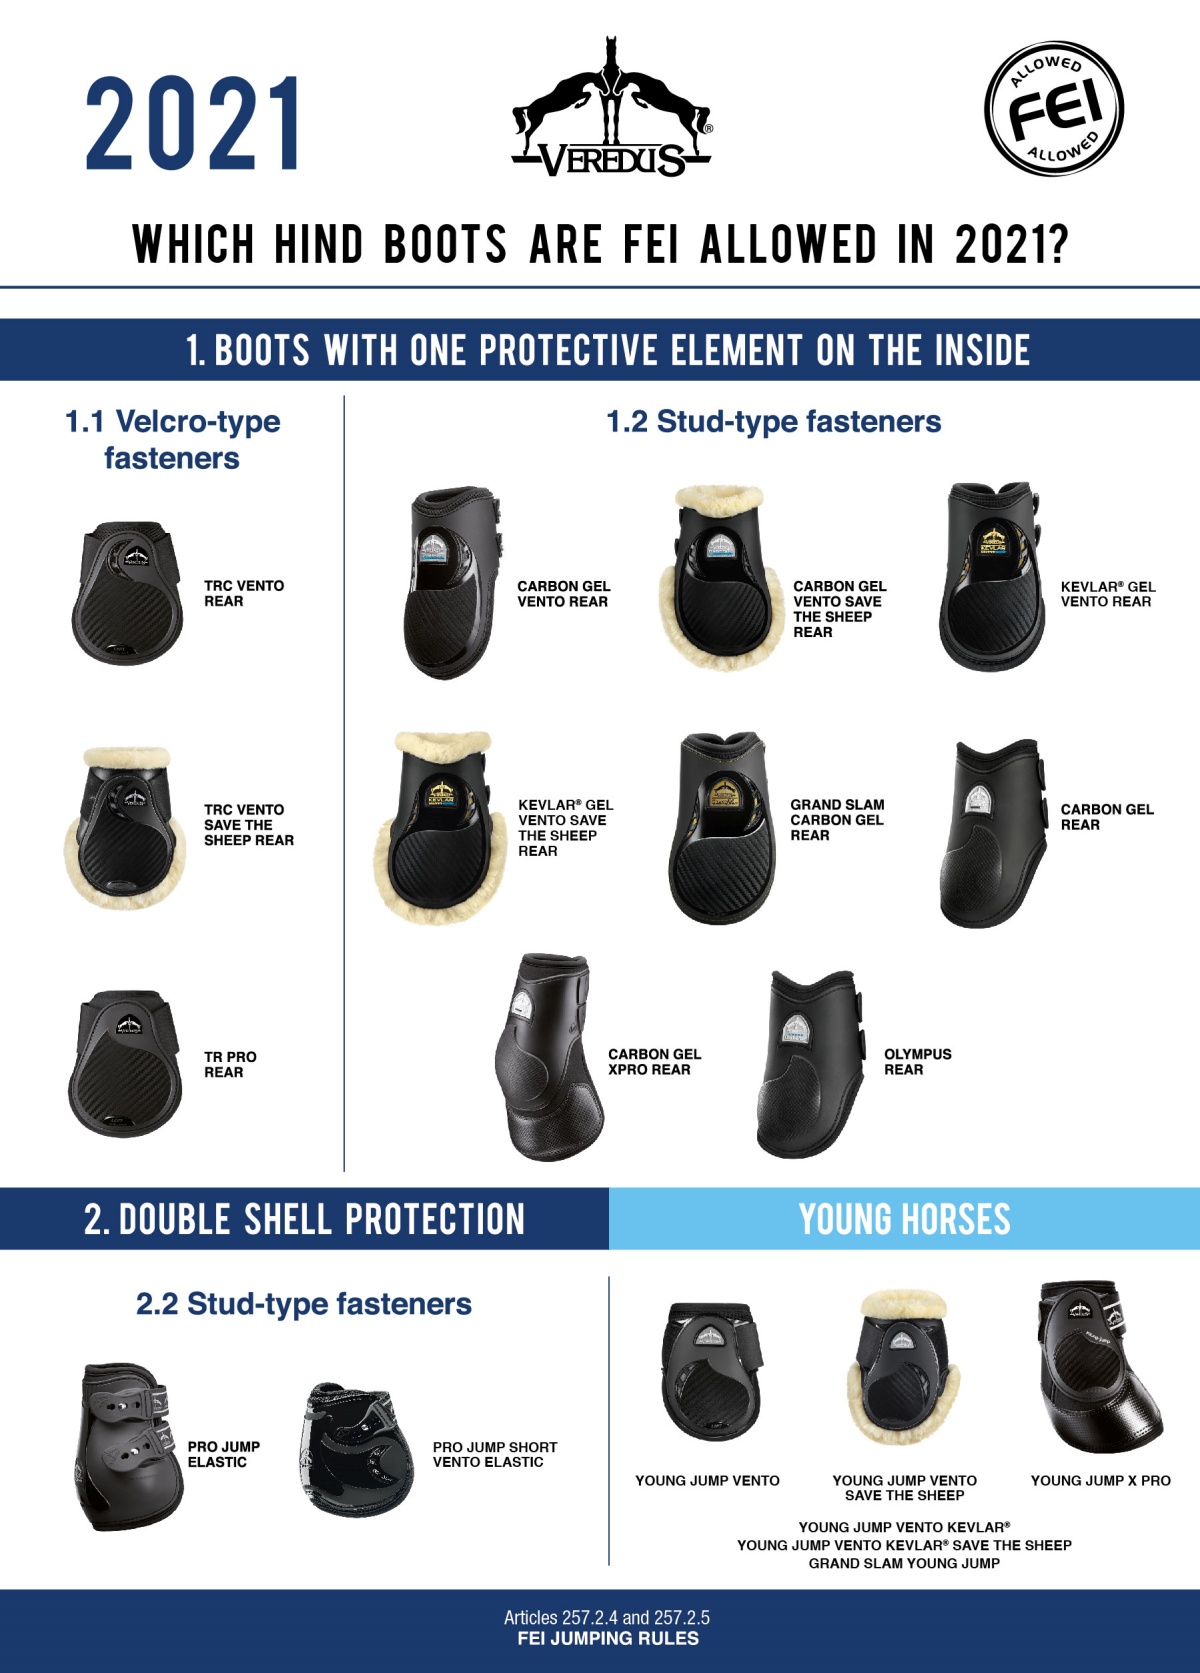 2021 FEI Rules Hind Boots